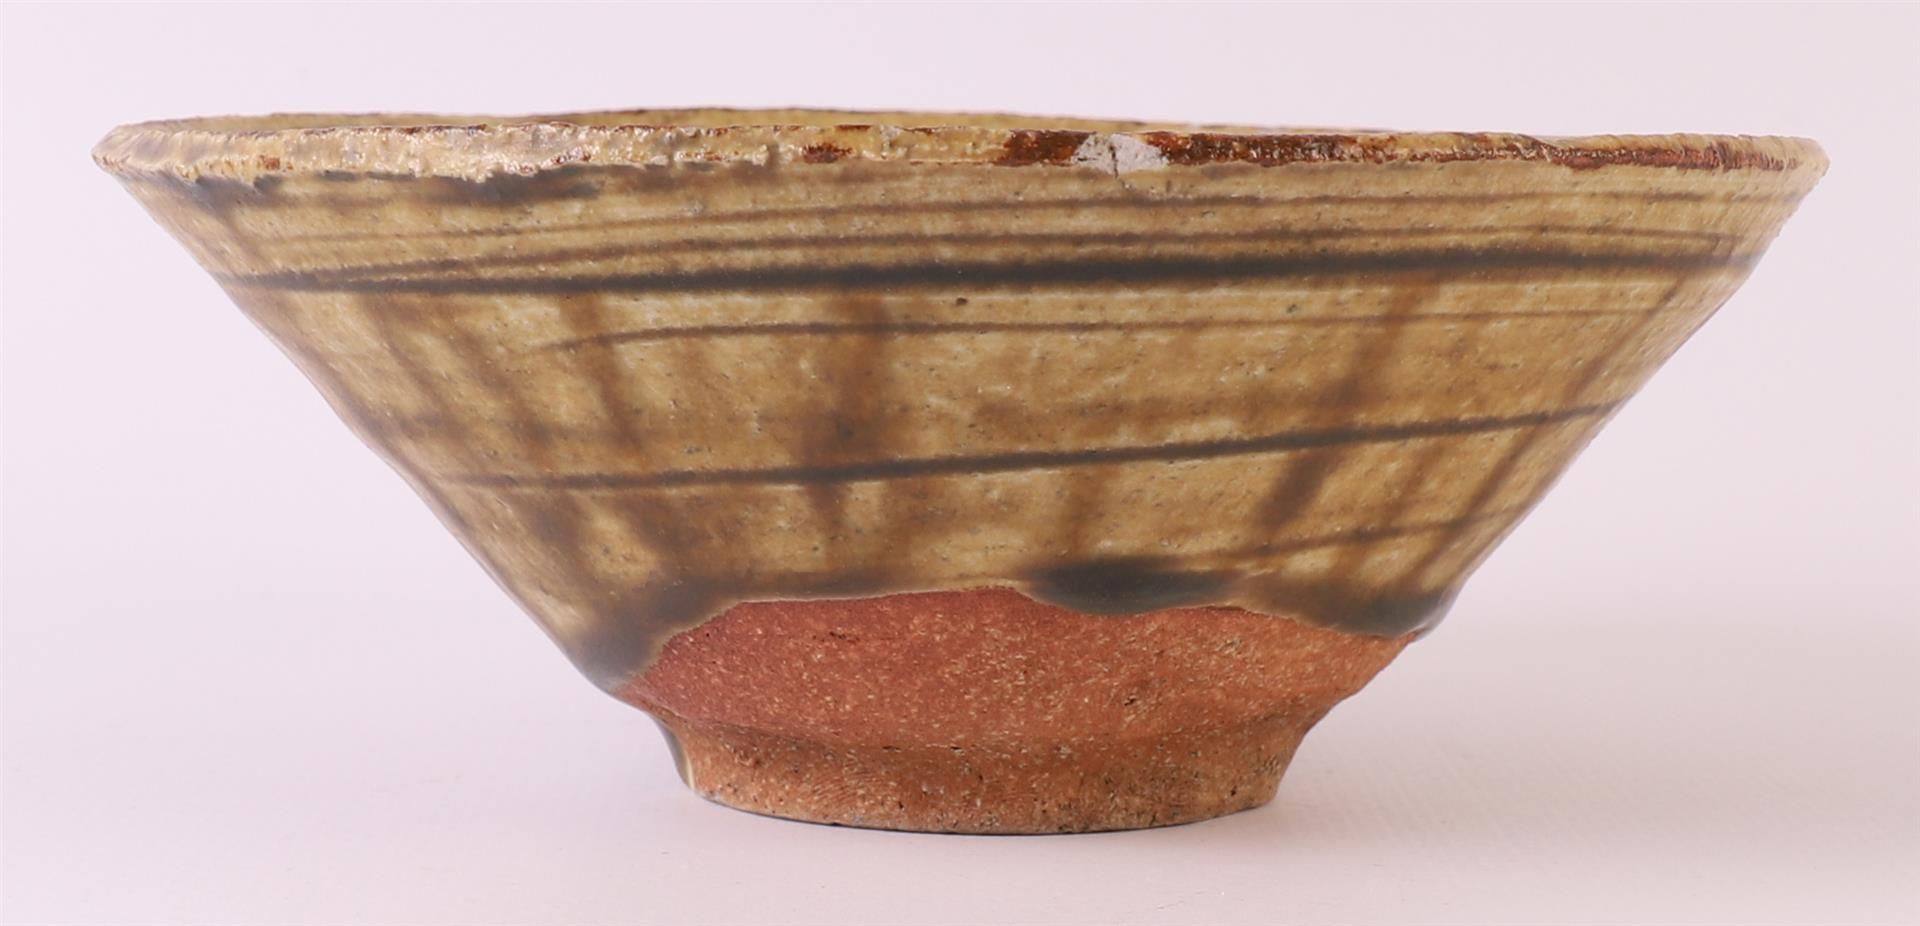 A brown glazed earthenware conical Temmoku bowl, China, Song dynasty - Image 3 of 8